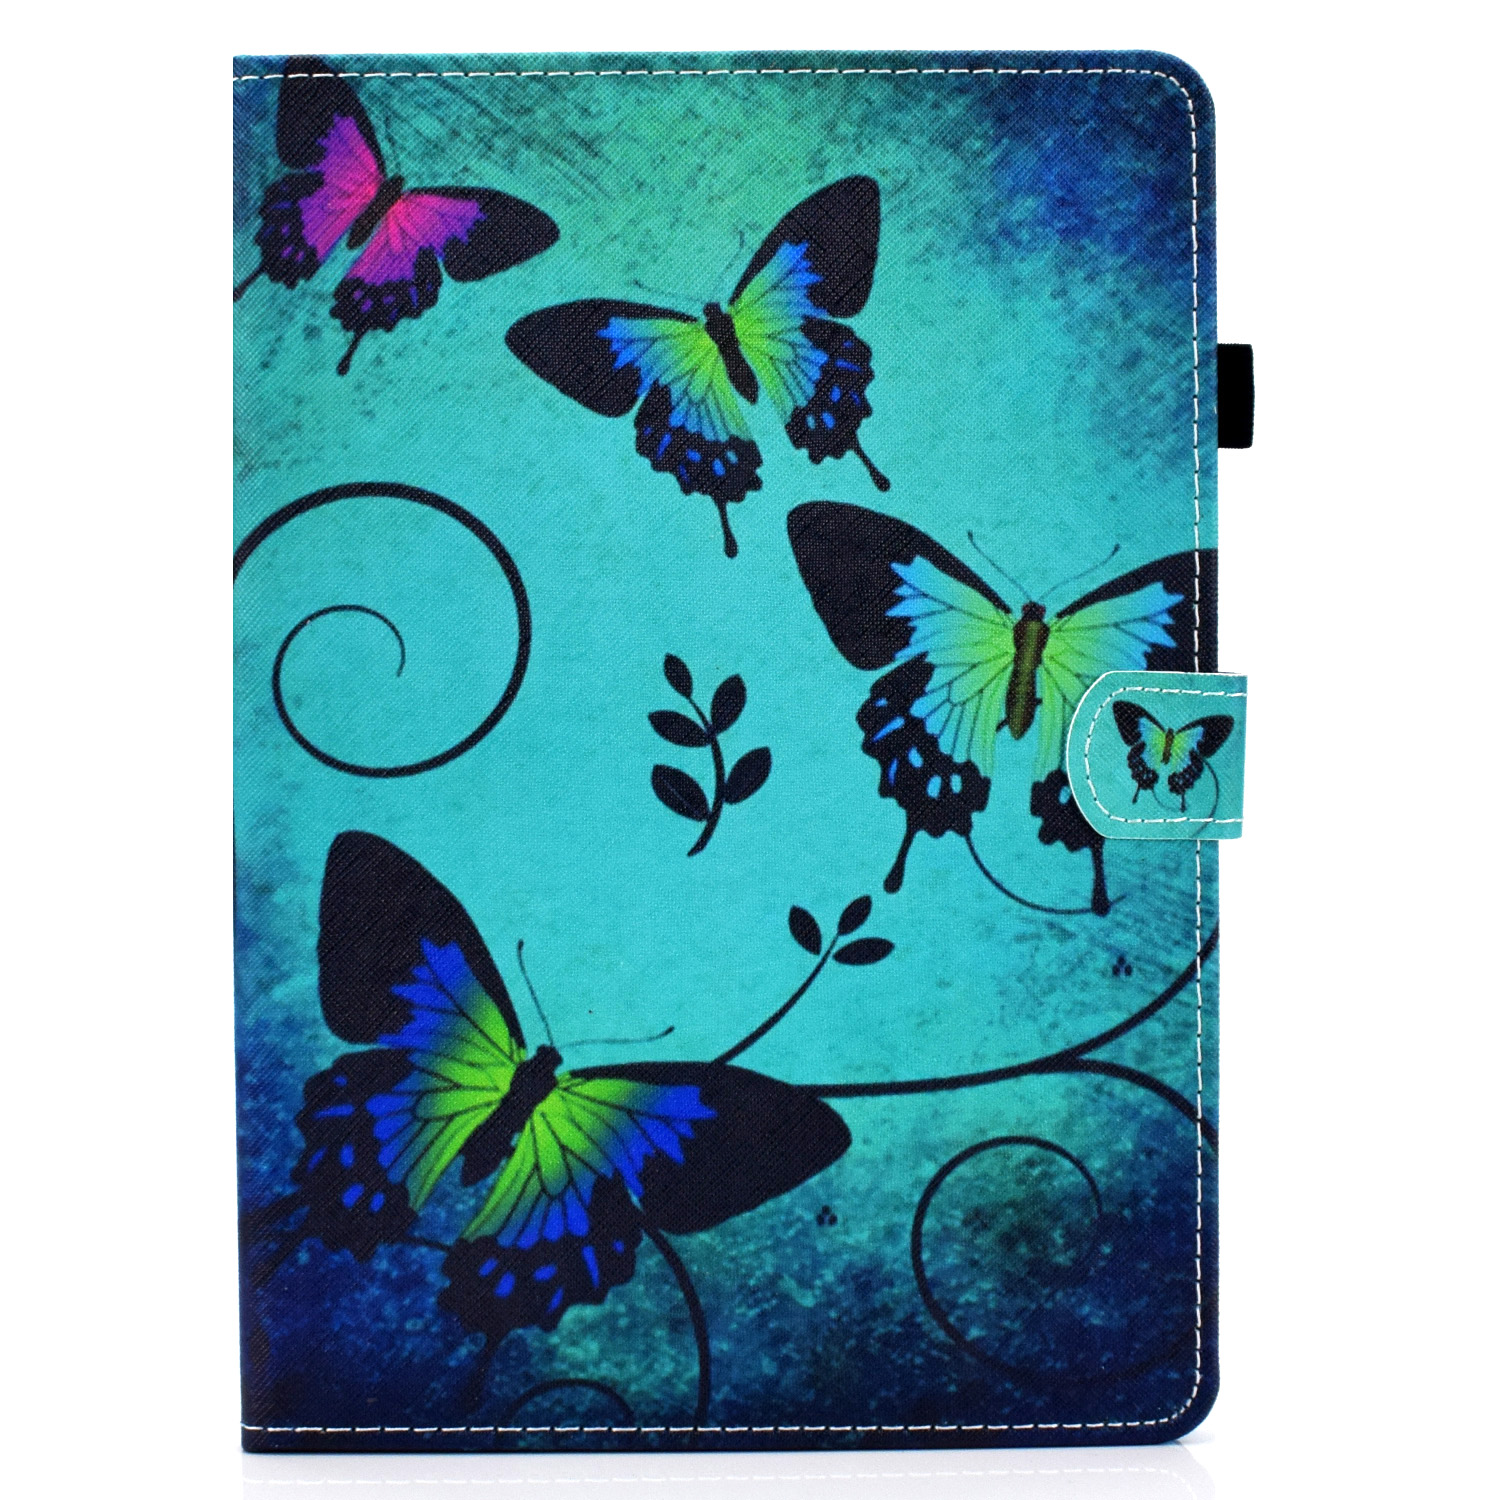 Cat Case for iPad Air 2019 3 3rd Generation Pro 10.5 A2123 A2152 Smart Cover Soft Shockproof Animal Flip Anti Slip Tablet Shell + Film + Pen